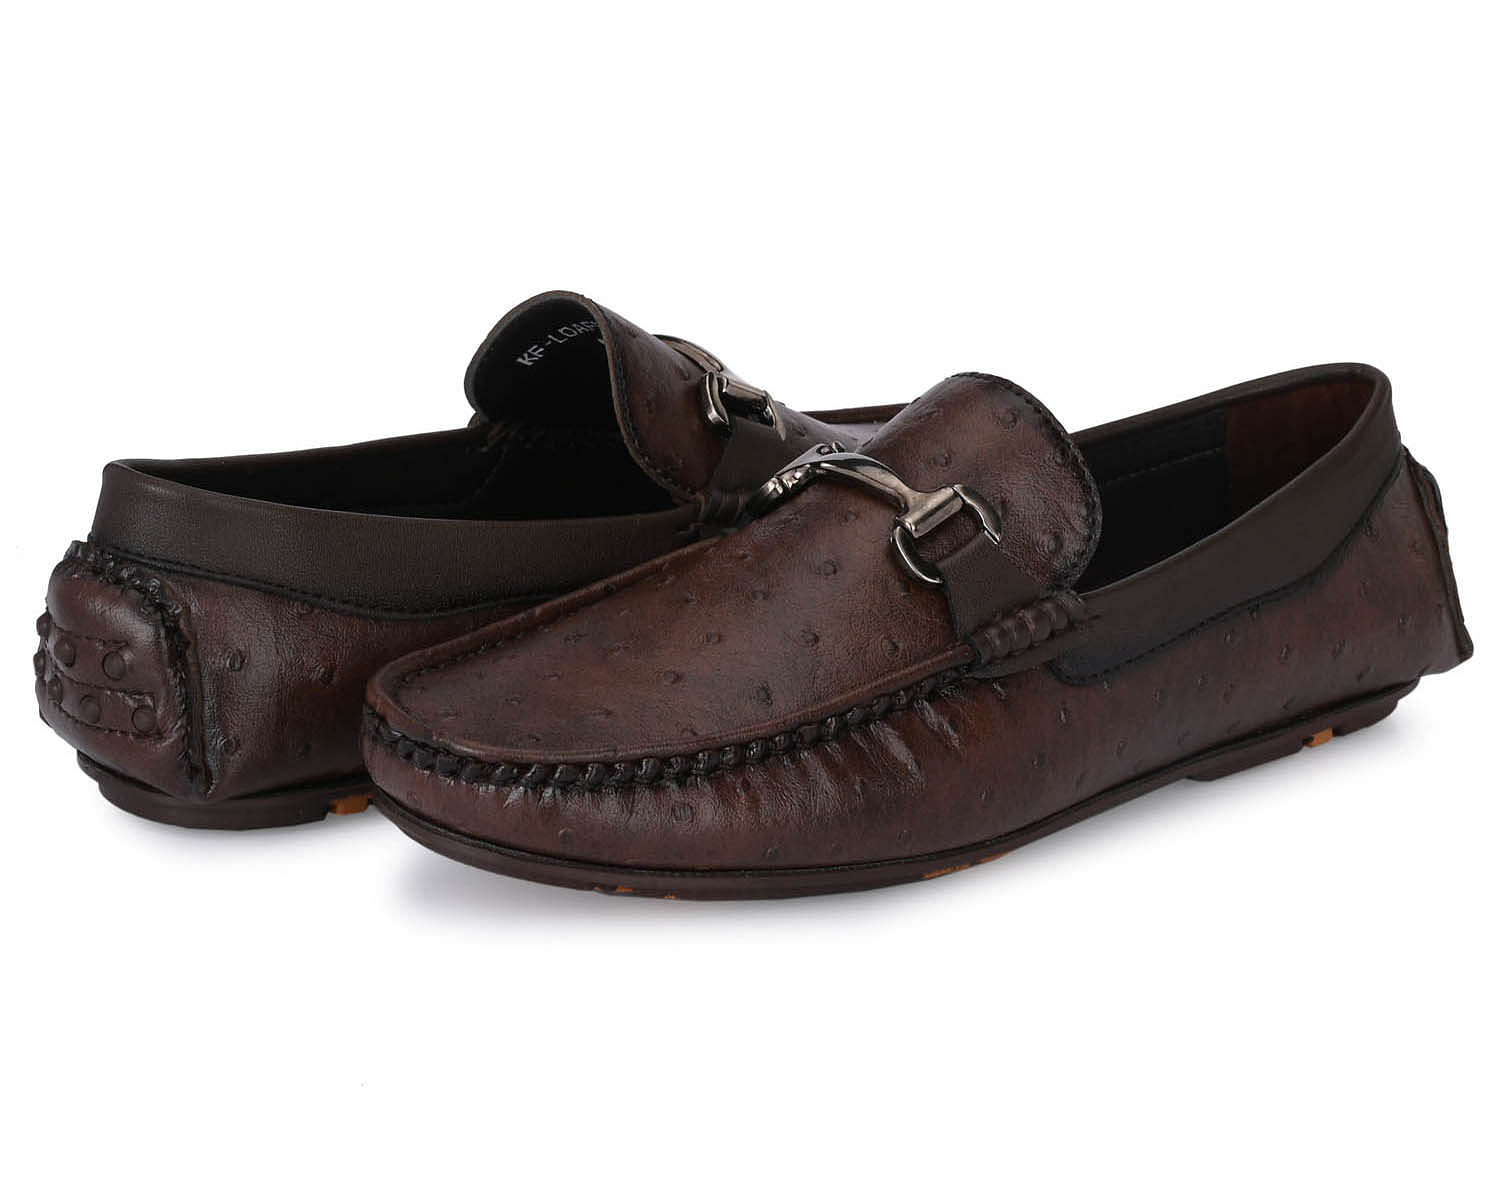 Pair-it Men's Loafers Shoes -KF-Loafer 116- Brown